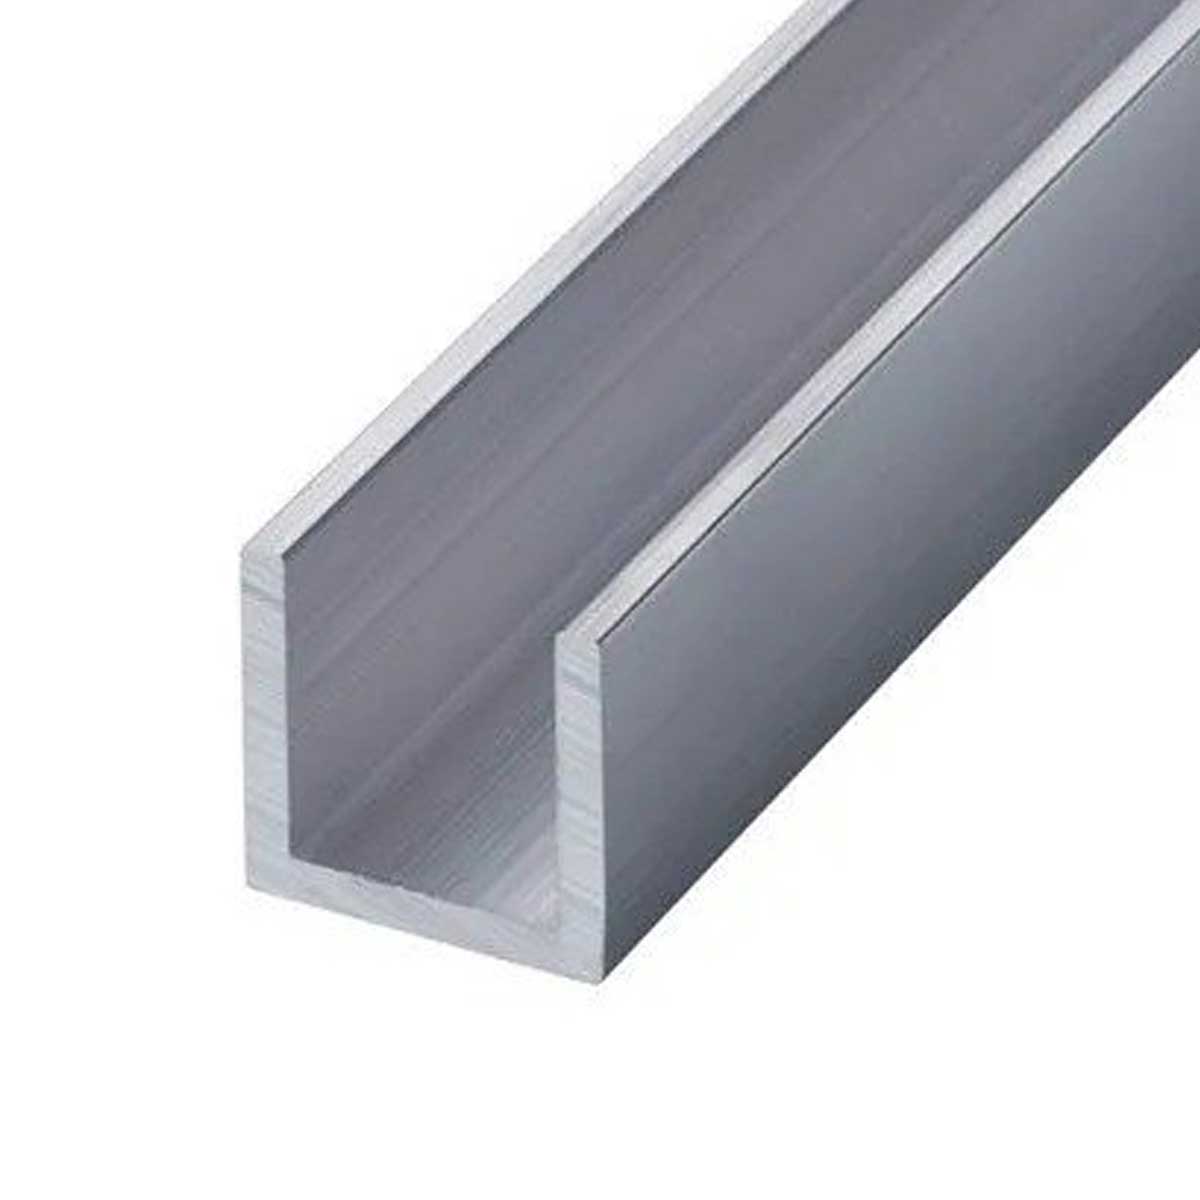 Aluminium C Channel For Construction Manufacturers, Suppliers in Auraiya